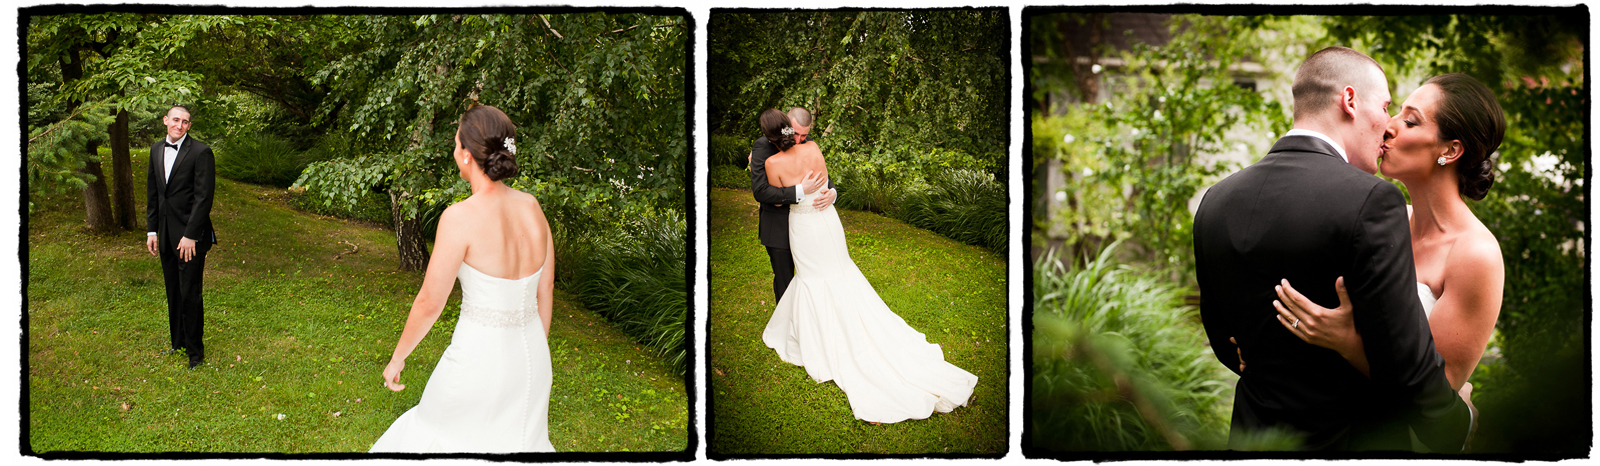 Ben and Nicole share a warm embrace at the Tarrytown House Estate.